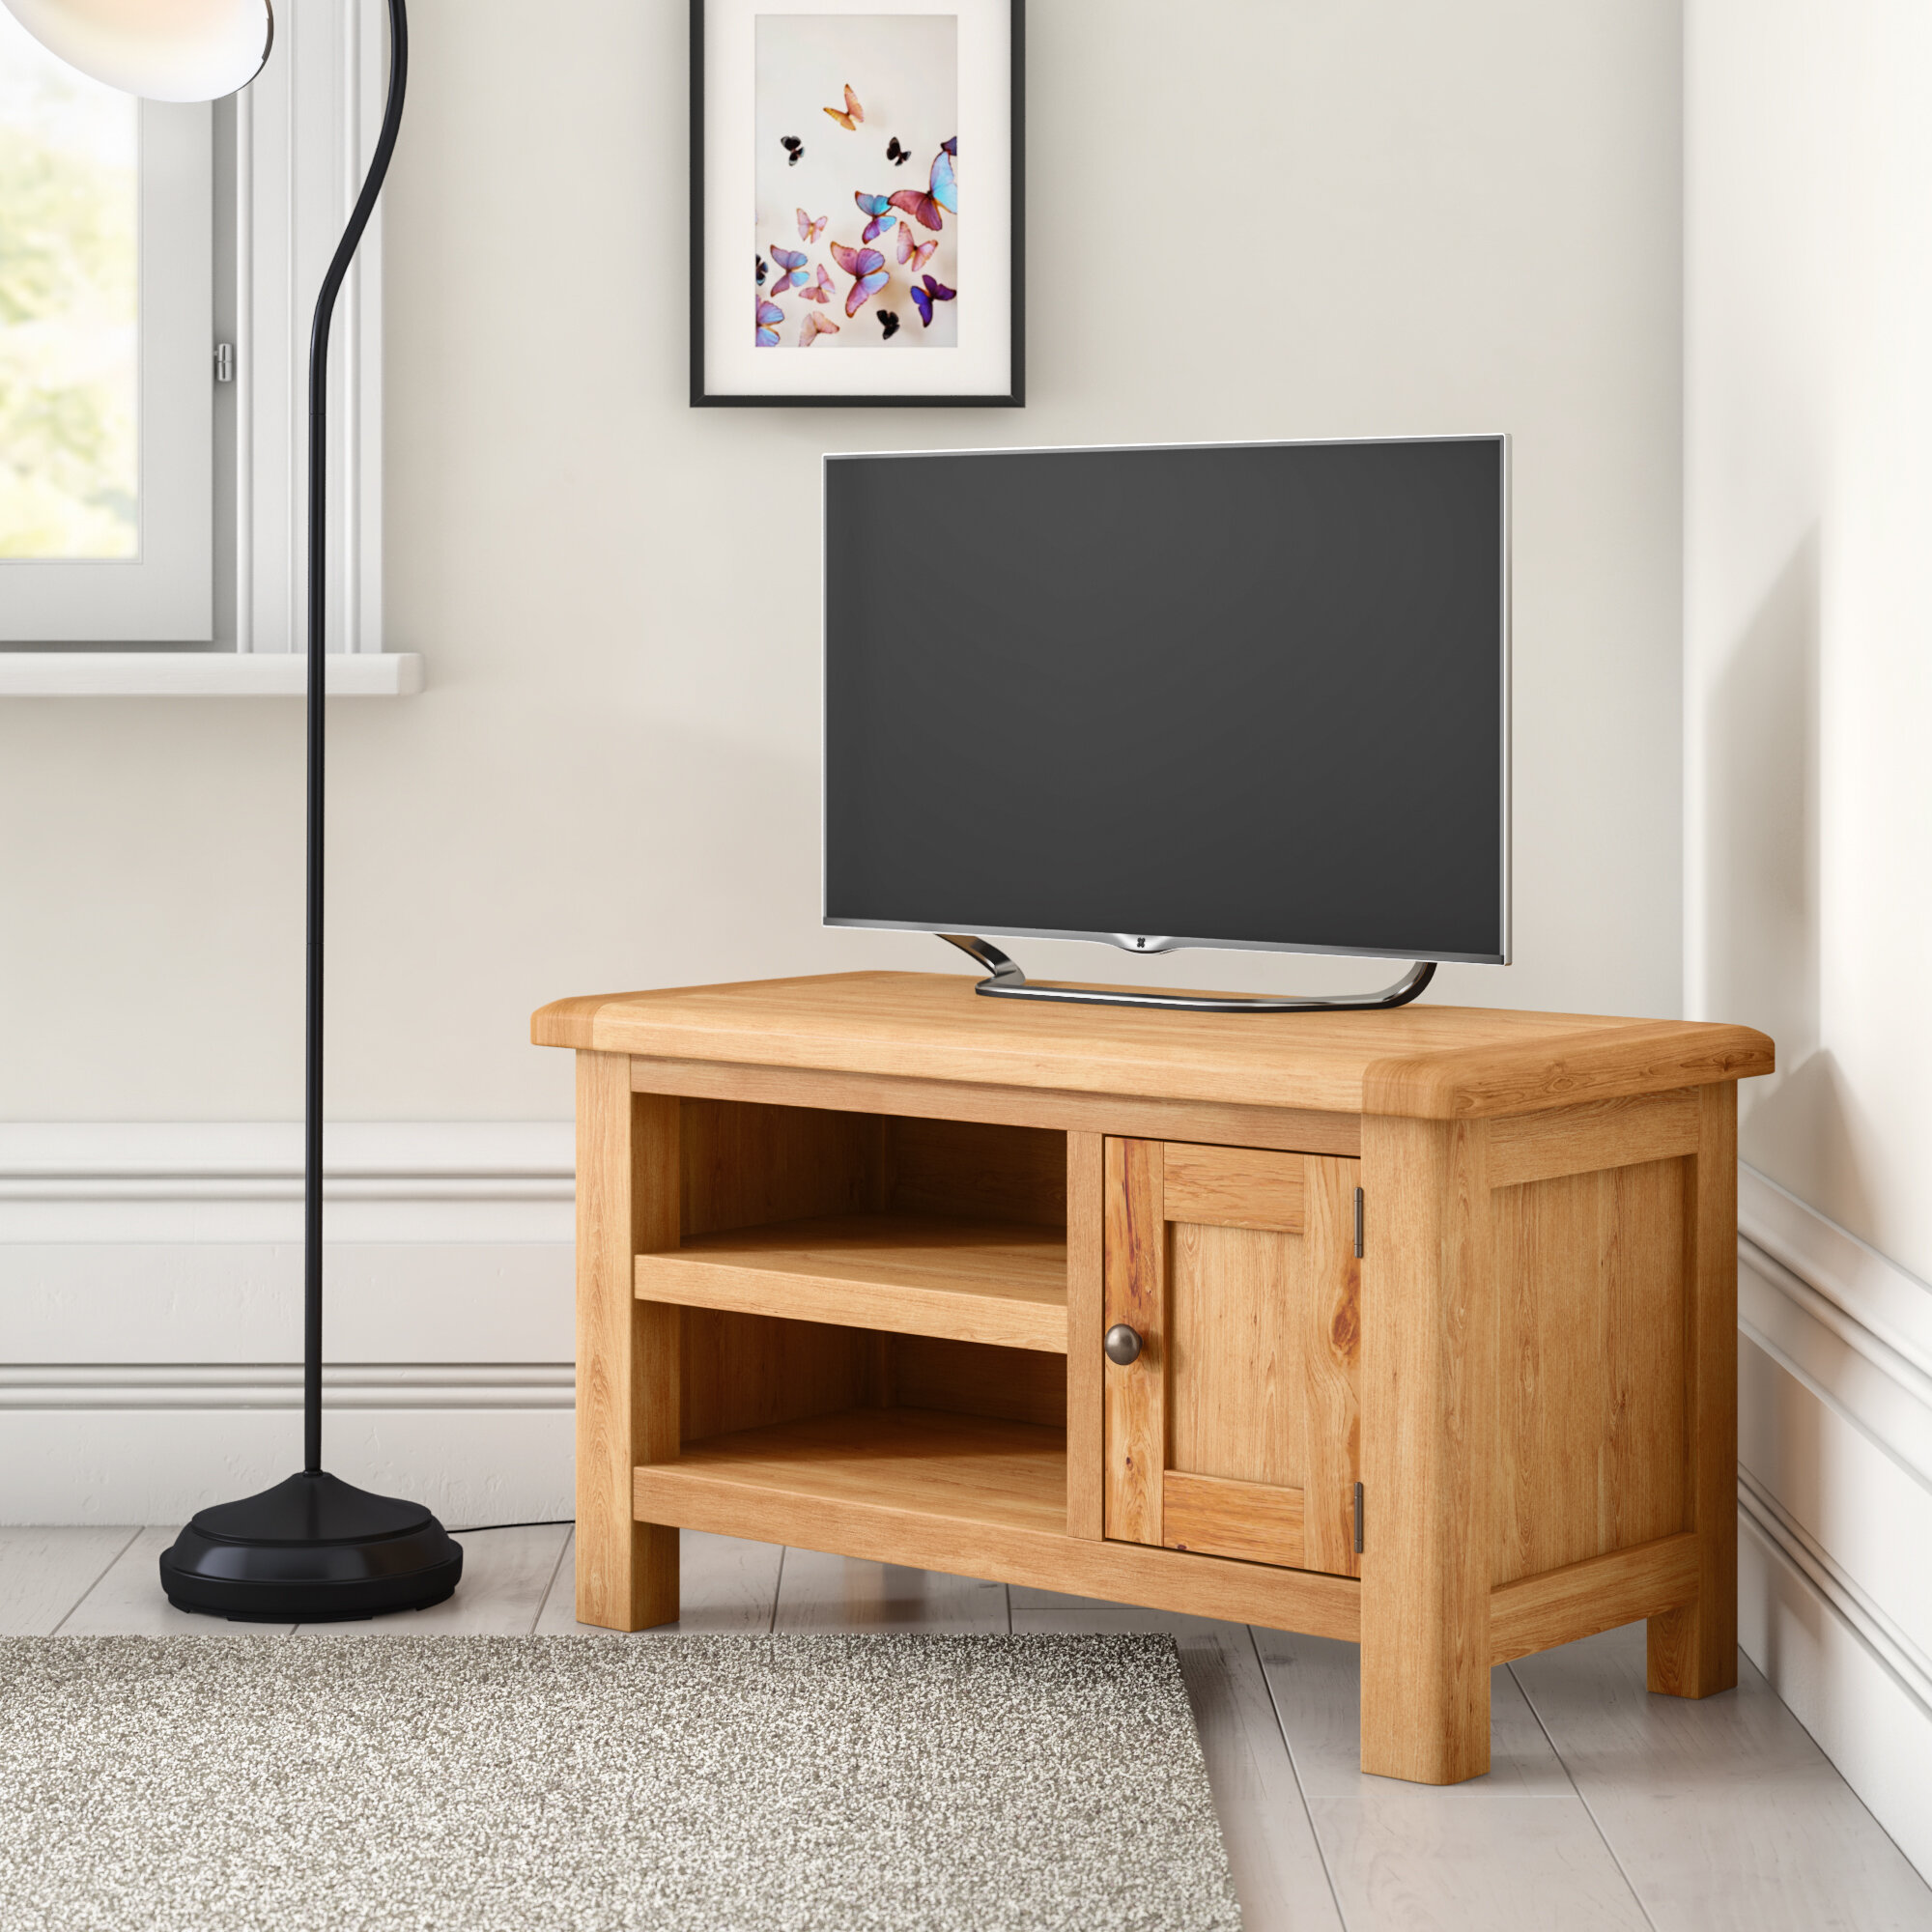 Union Rustic Benjamin Tv Stand For Tvs Up To 40 Reviews